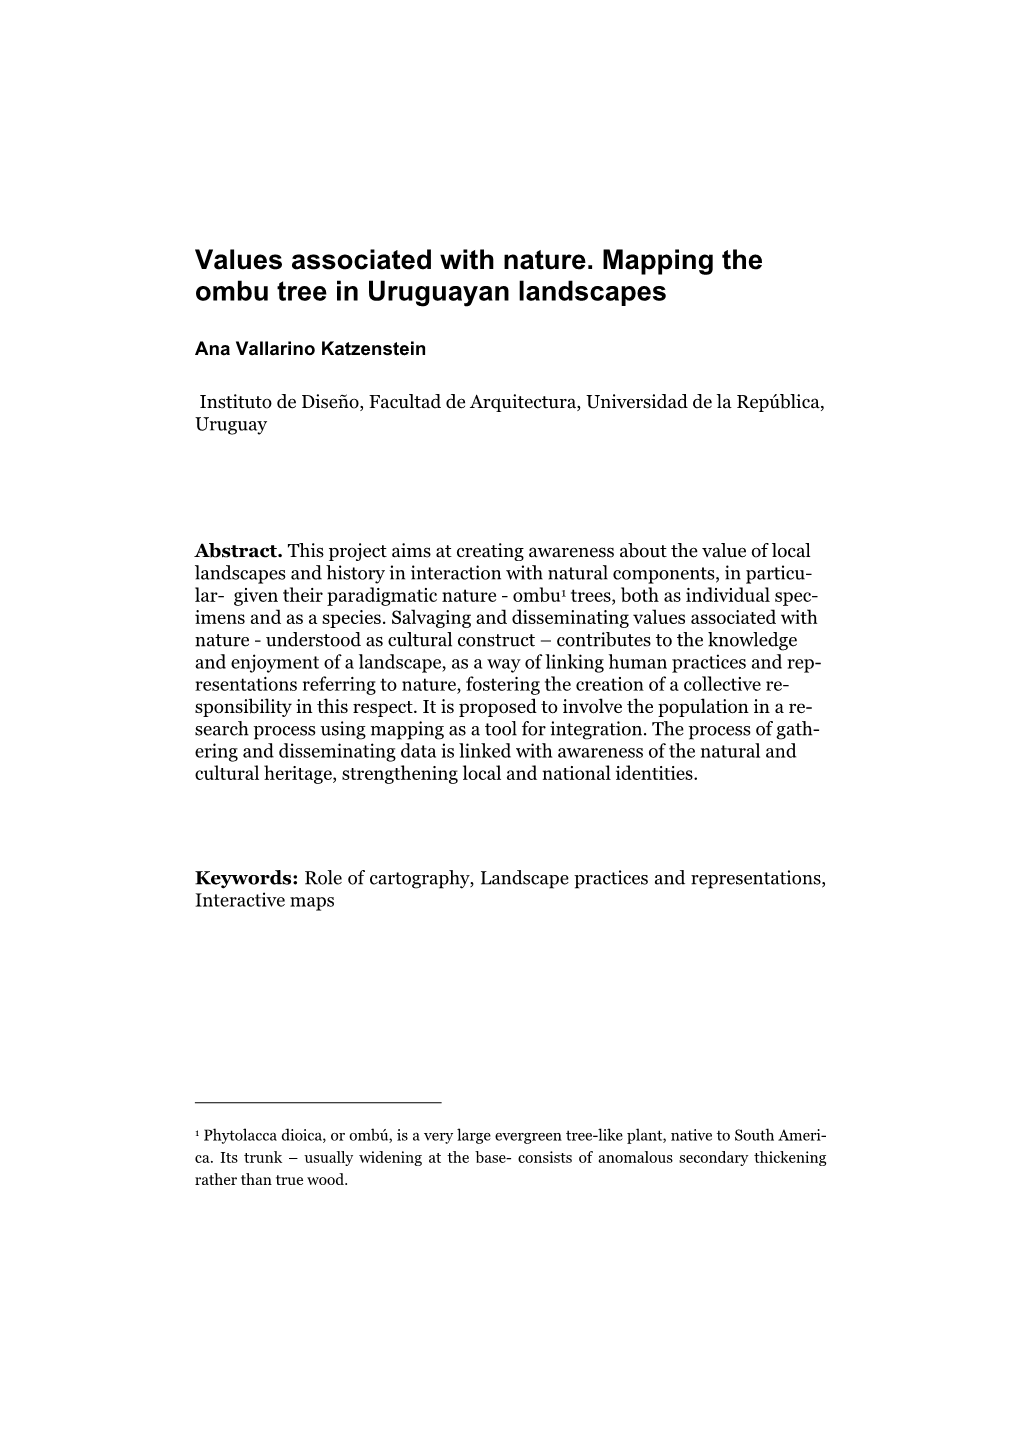 Values Associated with Nature. Mapping the Ombu Tree in Uruguayan Landscapes